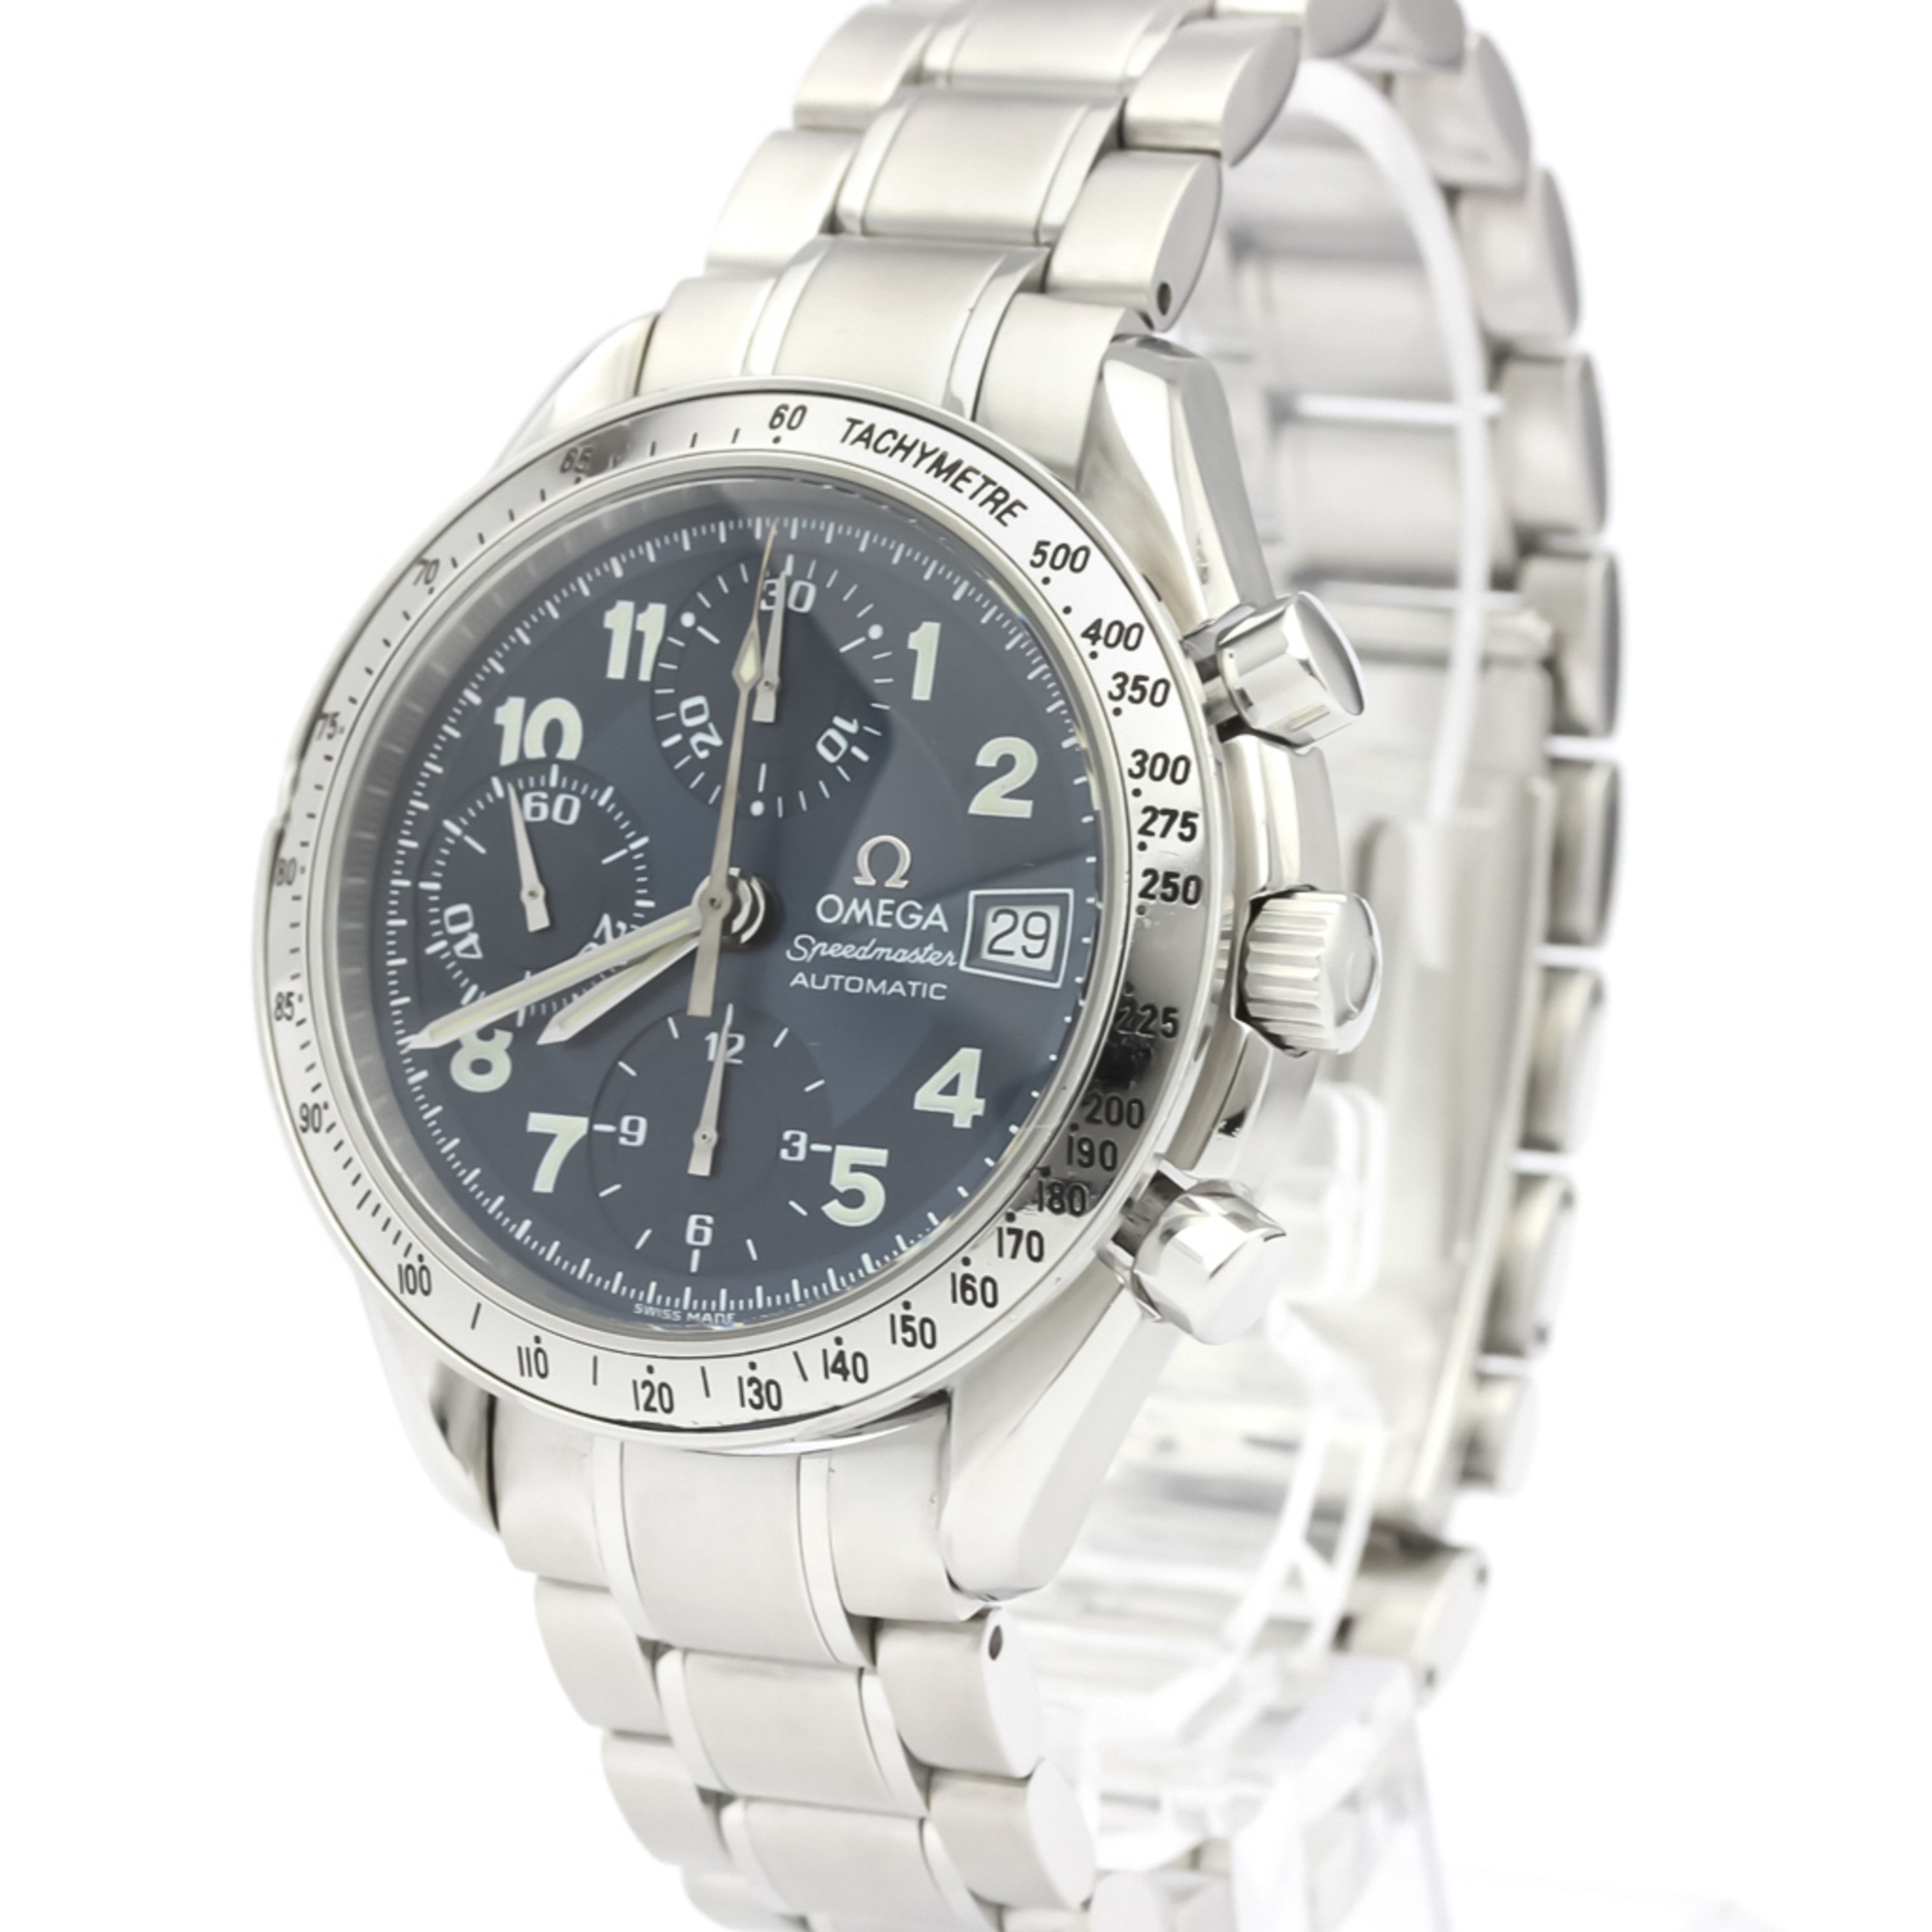 OMEGA Speedmaster Date Limited Edition in Japan Watch 3513.82